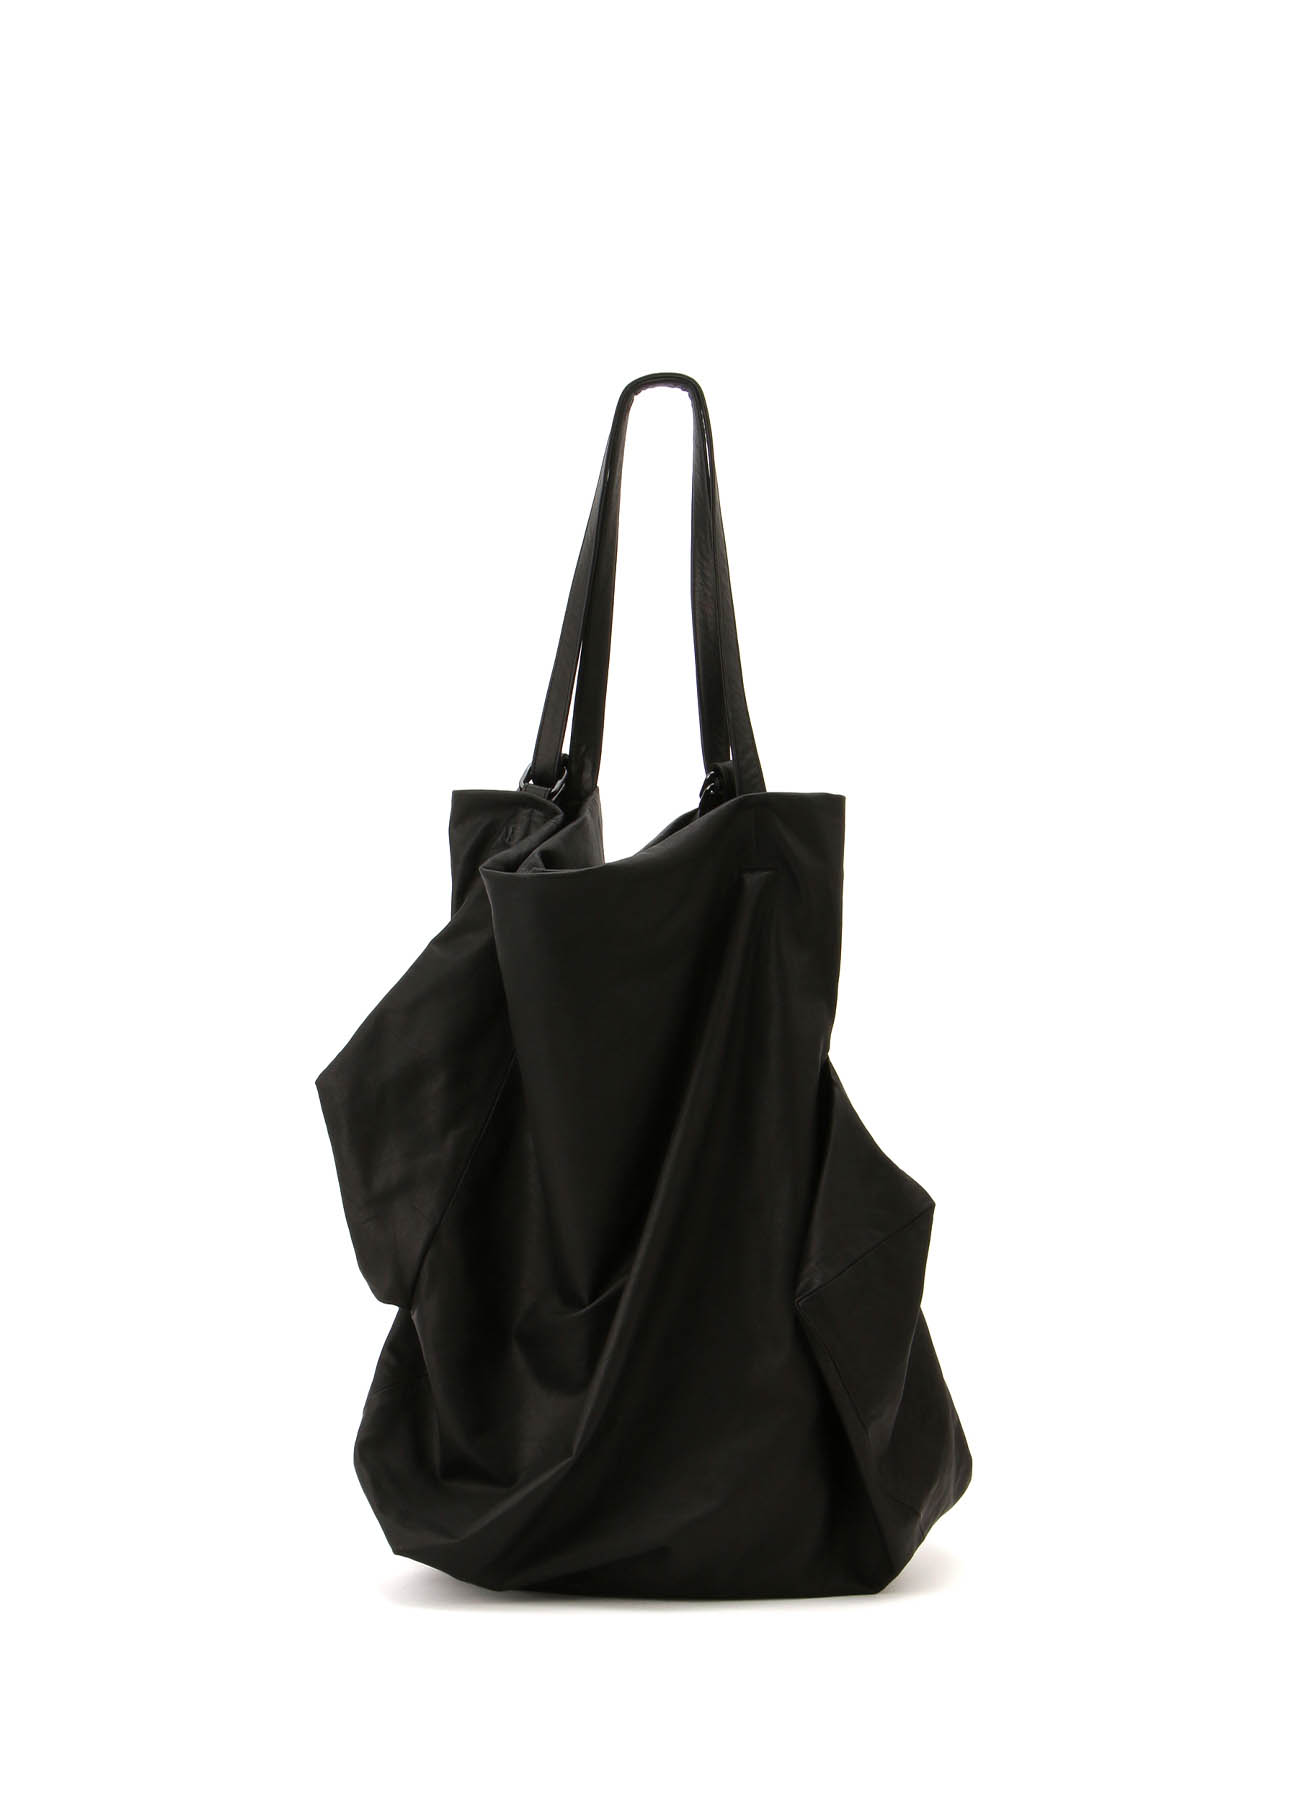 【2/3 12:00(JST) Release】Unevenness tote(Leather)